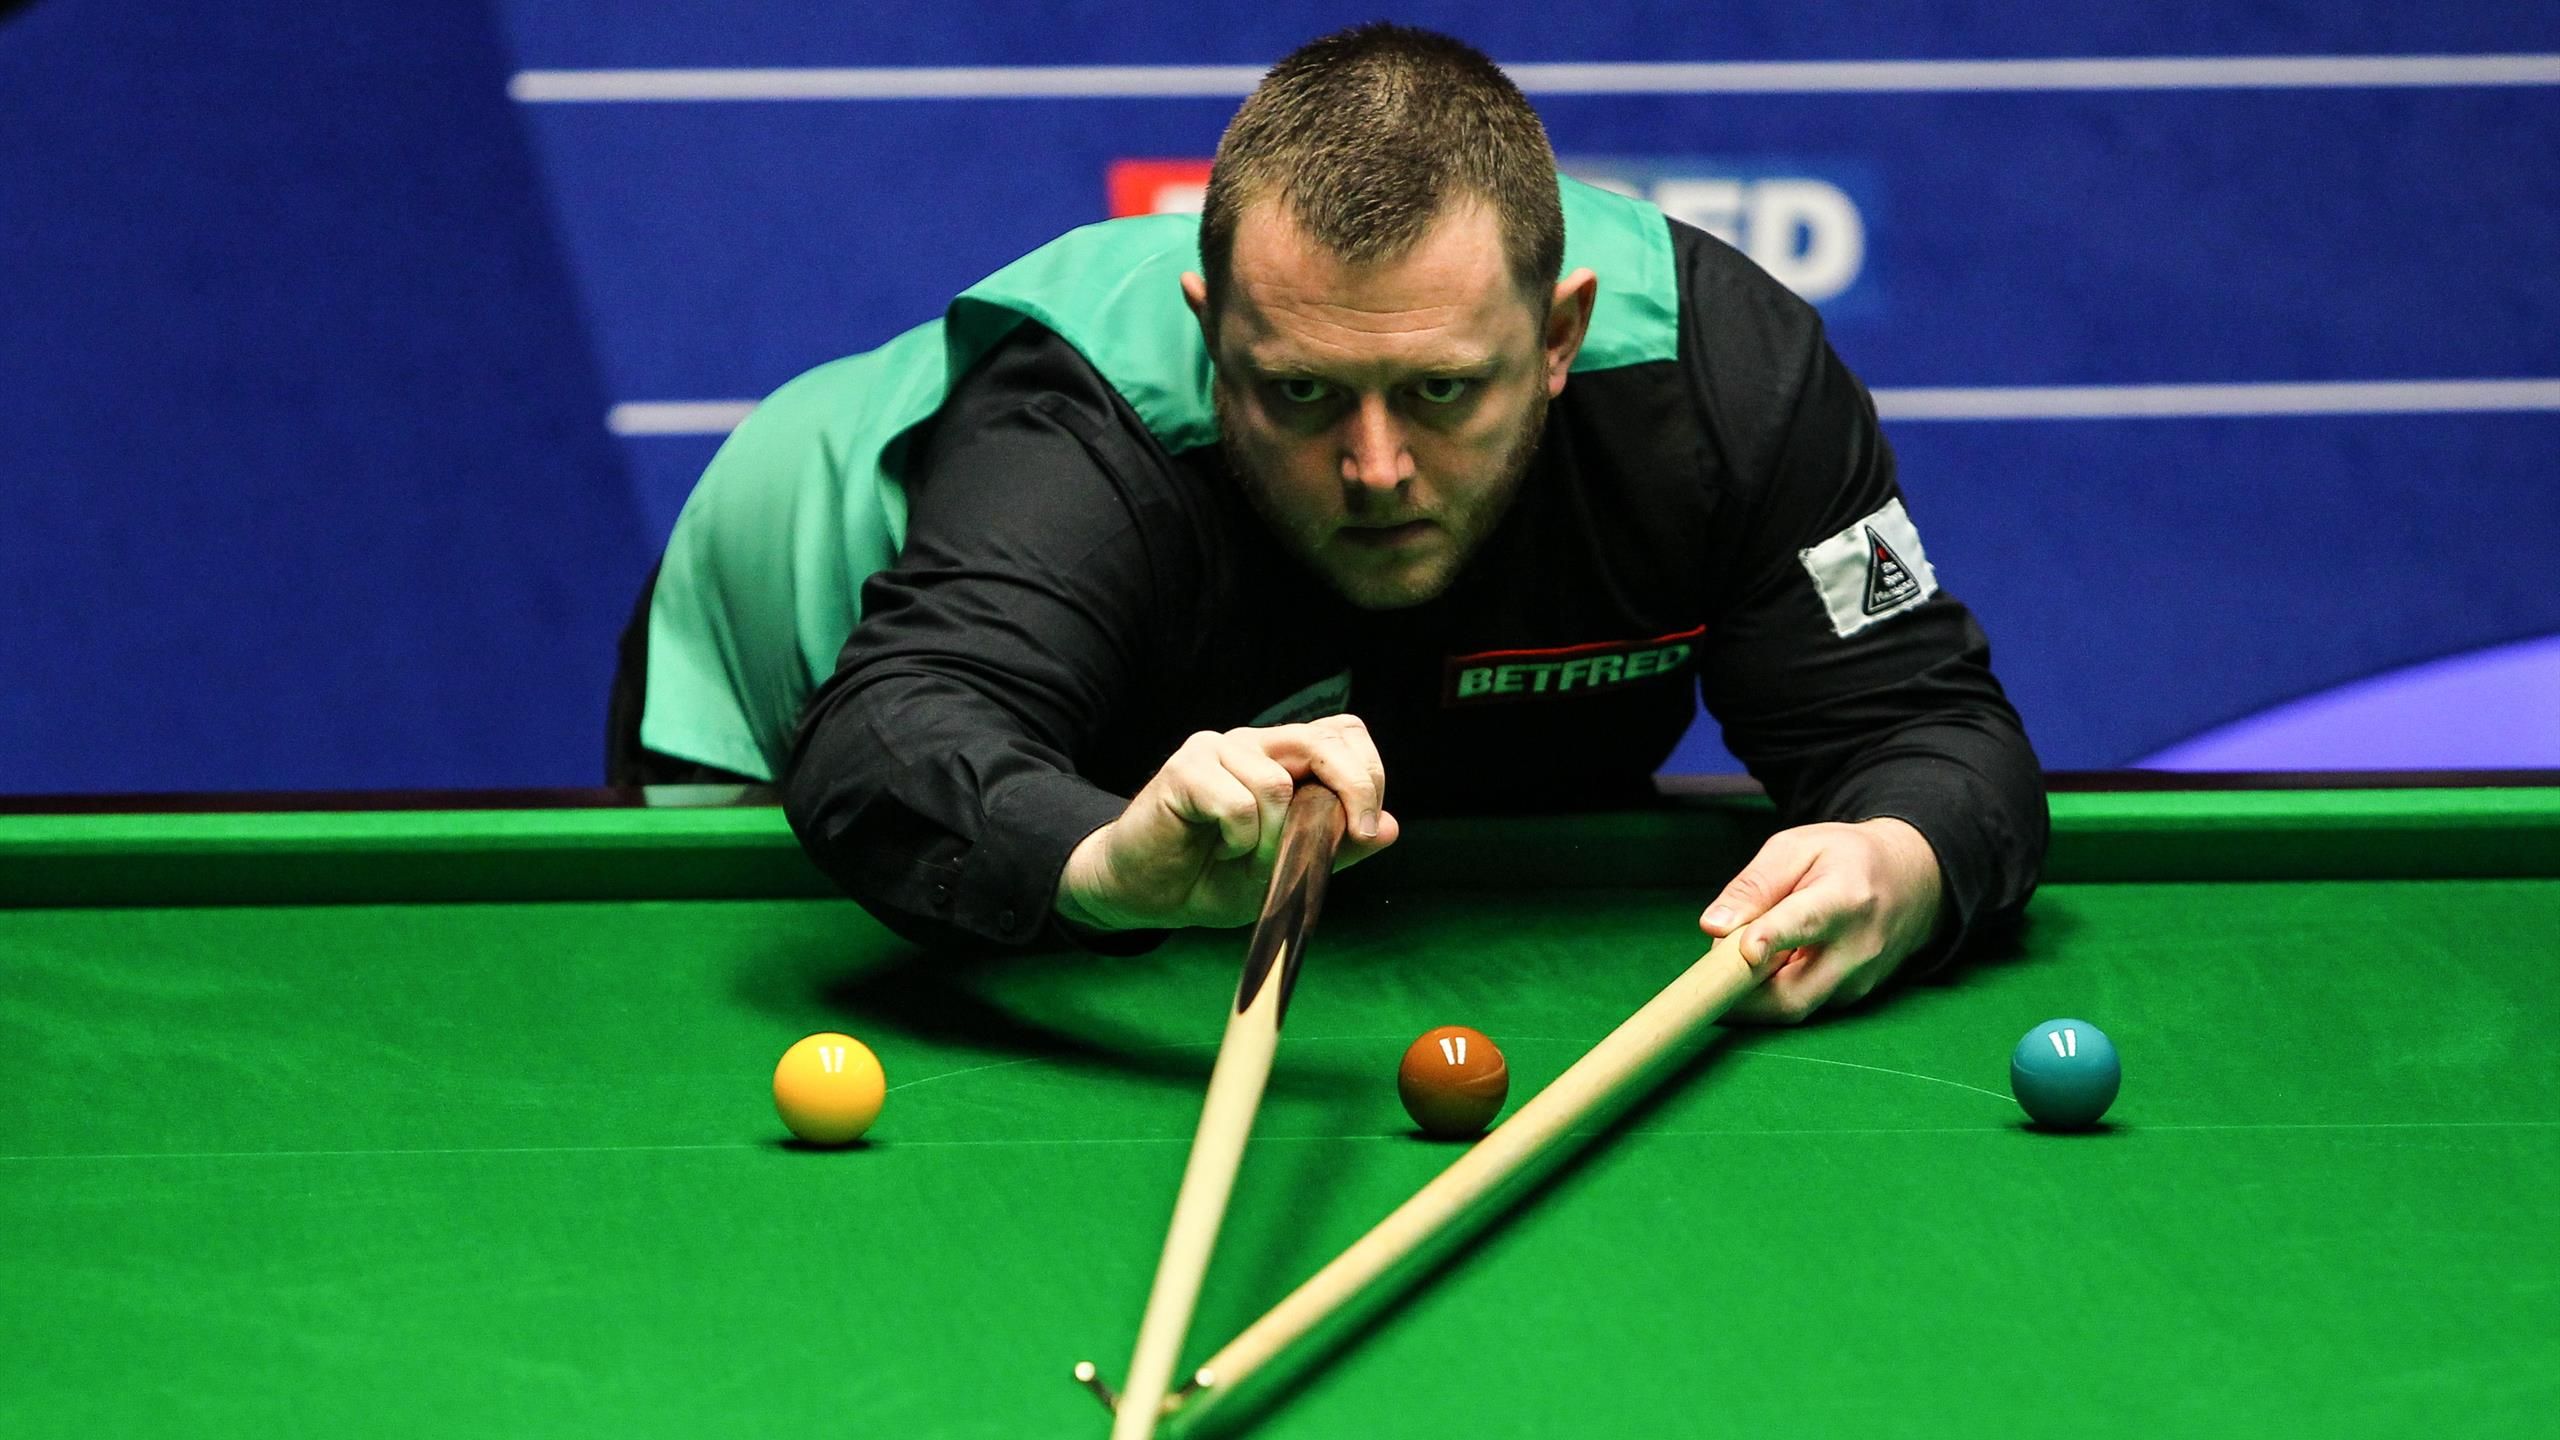 How to watch Six-Red World Championship snooker 2023 on TV and live stream